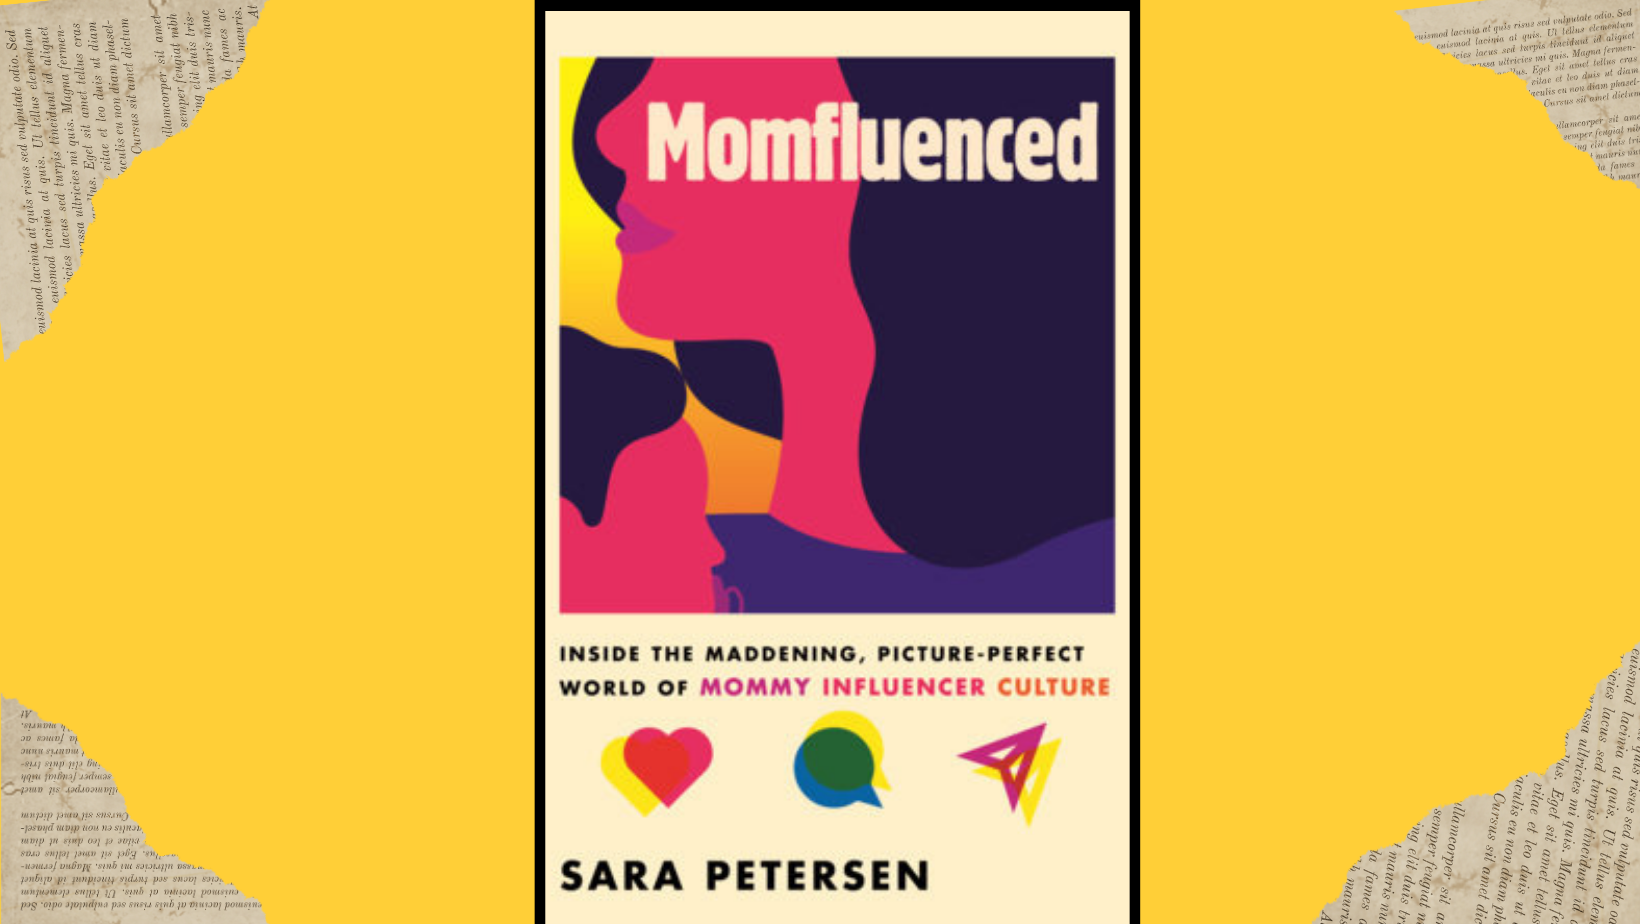 Review of Momfluenced: Inside the Maddening, Picture-Perfect World of Mommy Influencer Culture